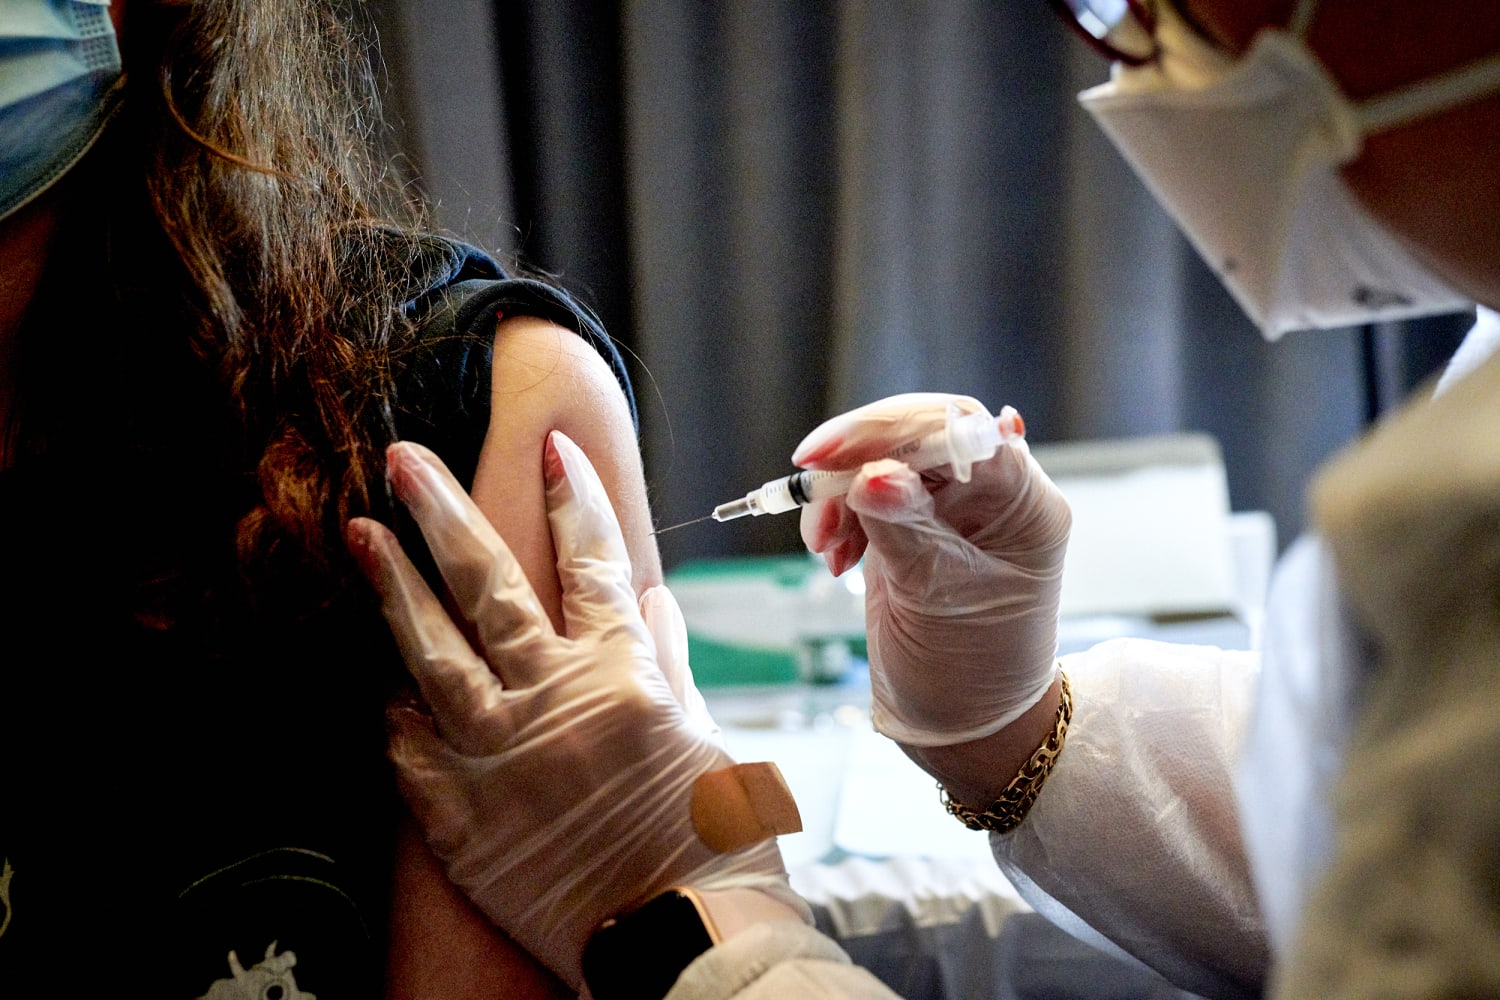 NYC is ending its vaccine mandate for private-sector employers on Nov. 1